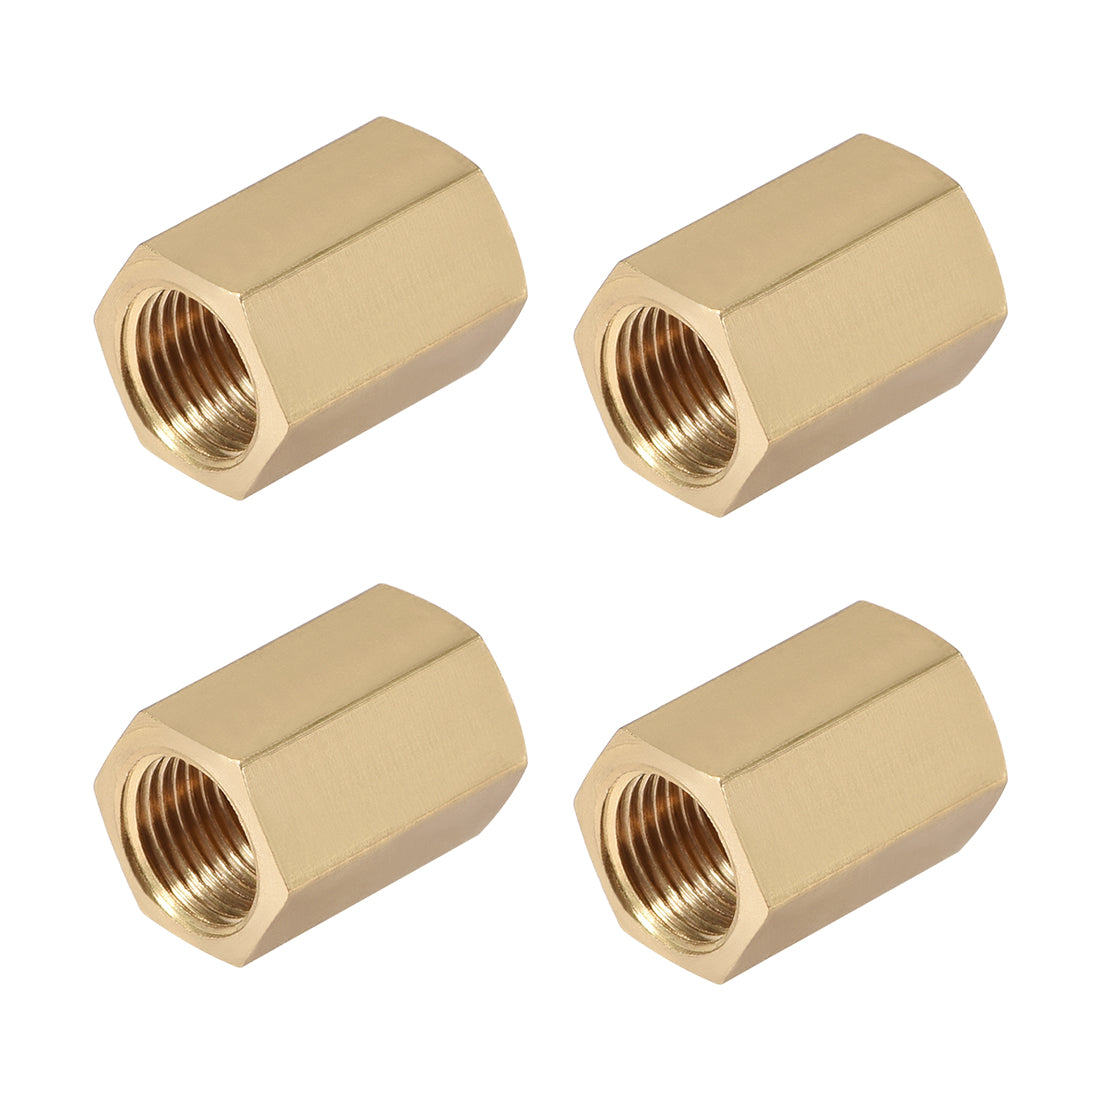 uxcell Uxcell Brass Pipe Fitting Connector Straight Hex Nipple Coupler 1/8 x 1/8 G Female Thread Gold Tone 4pcs